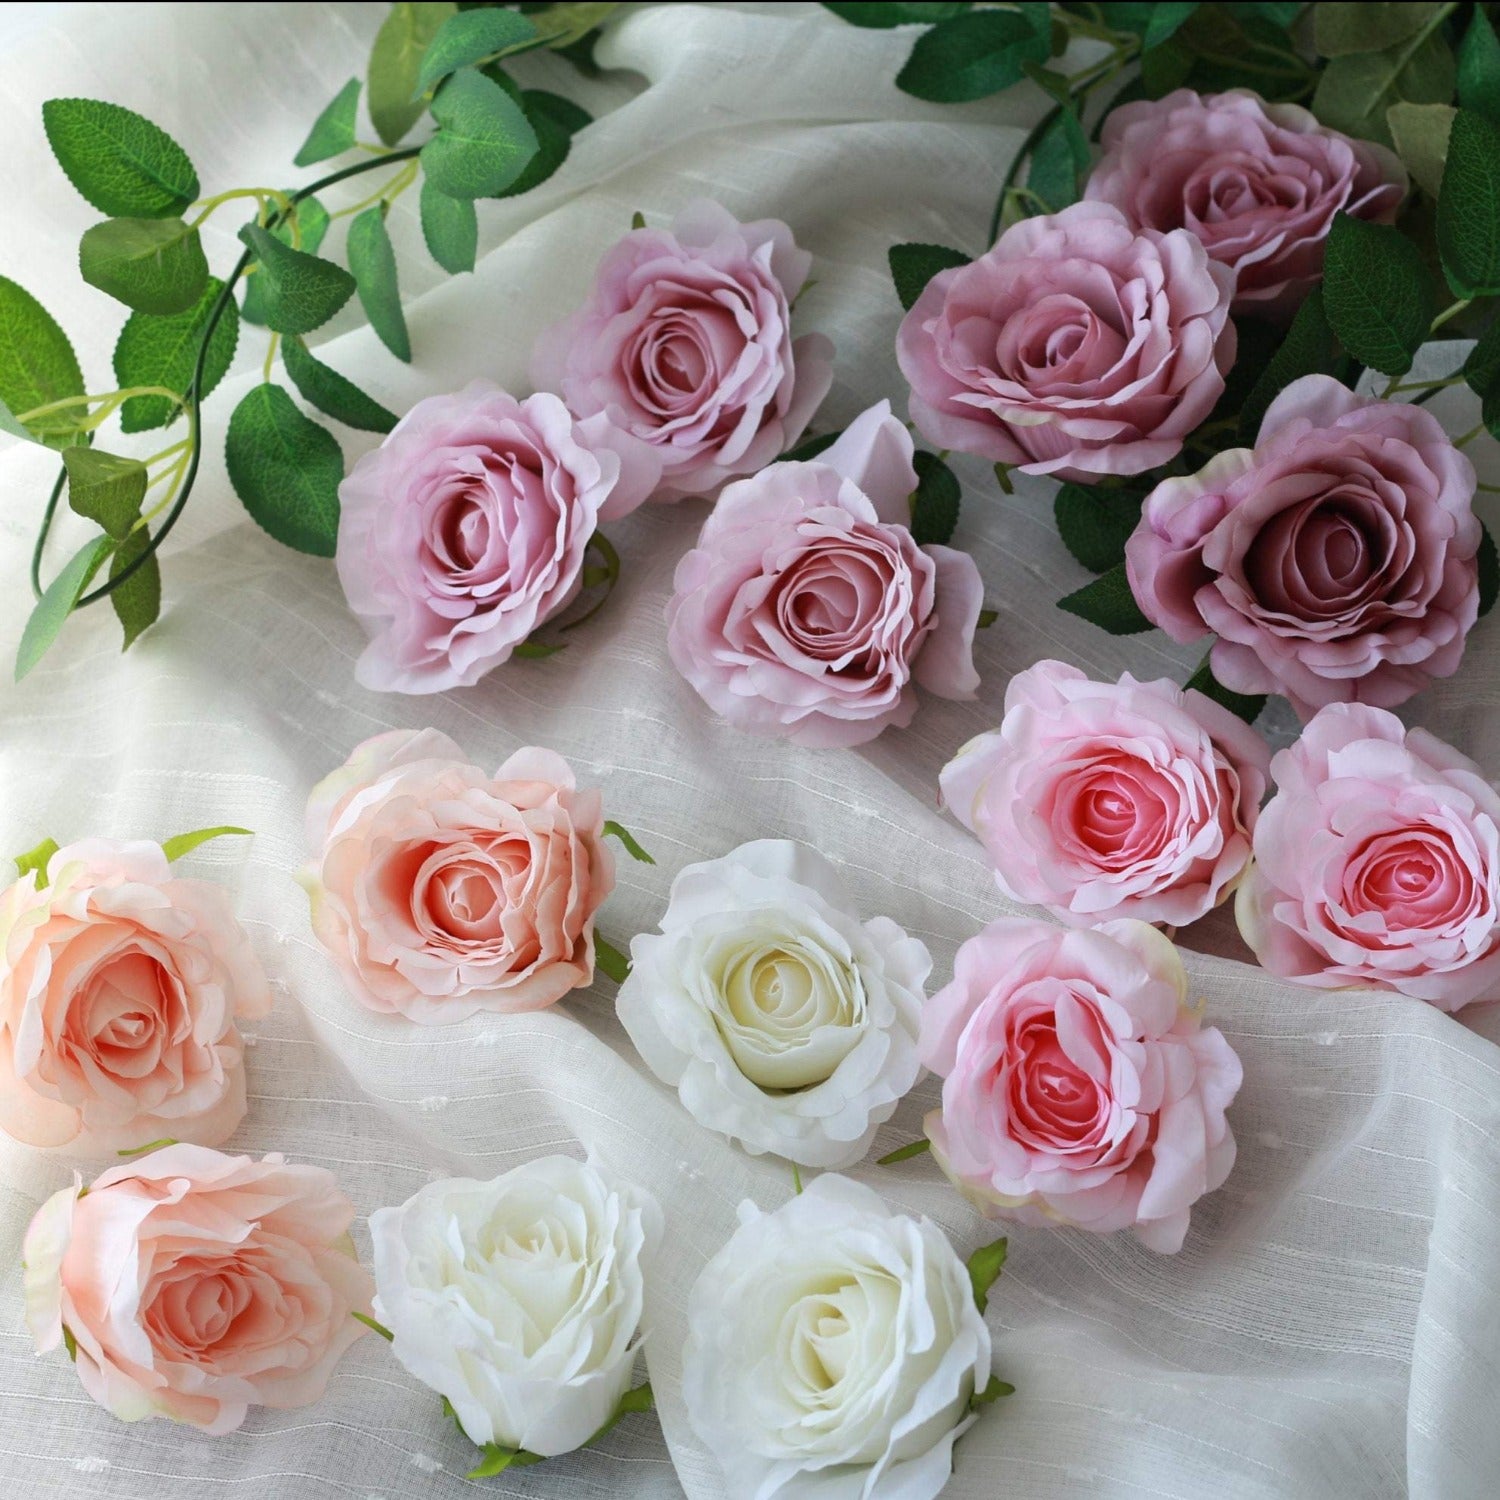 silk flowers mauve wedding decorations dusty pink, white roses